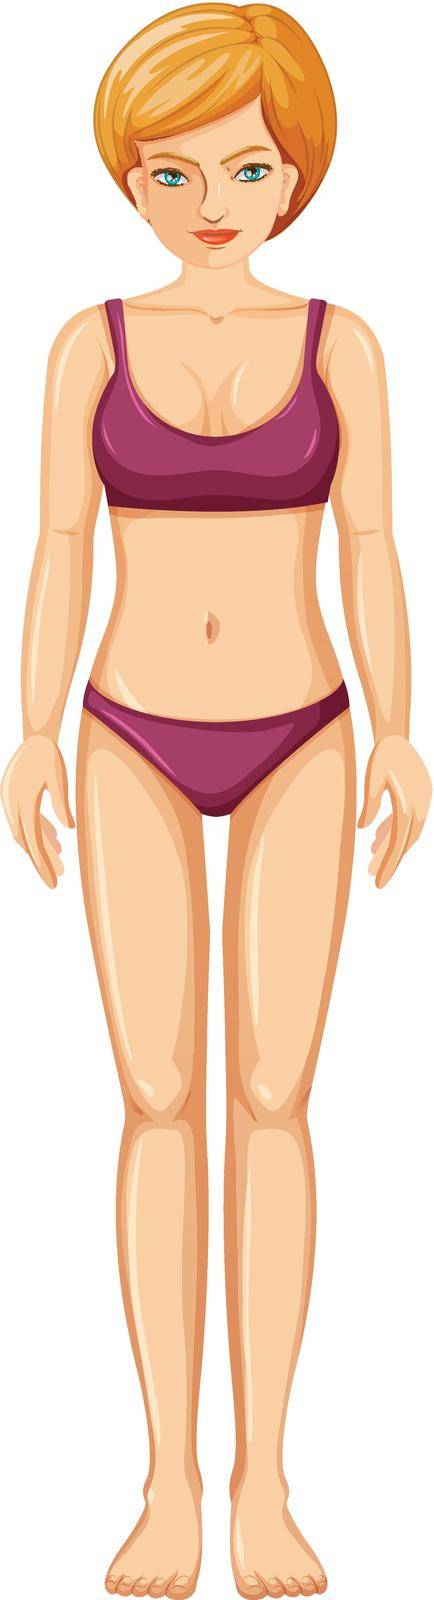 A Vector of Female Body by iimages